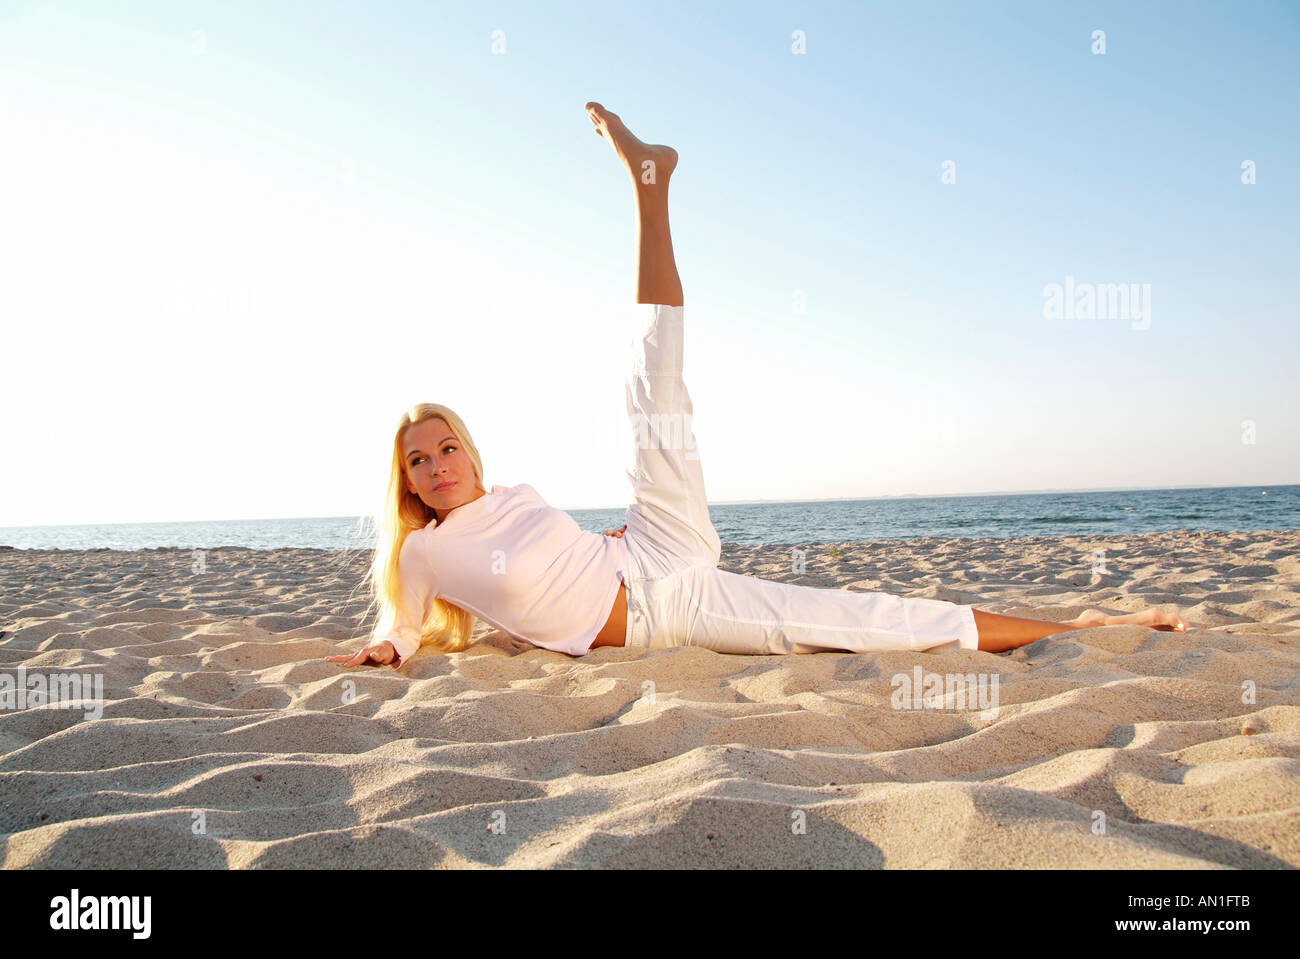 young woman lying at beachfront doing gymnastics in the sand Stock Photo